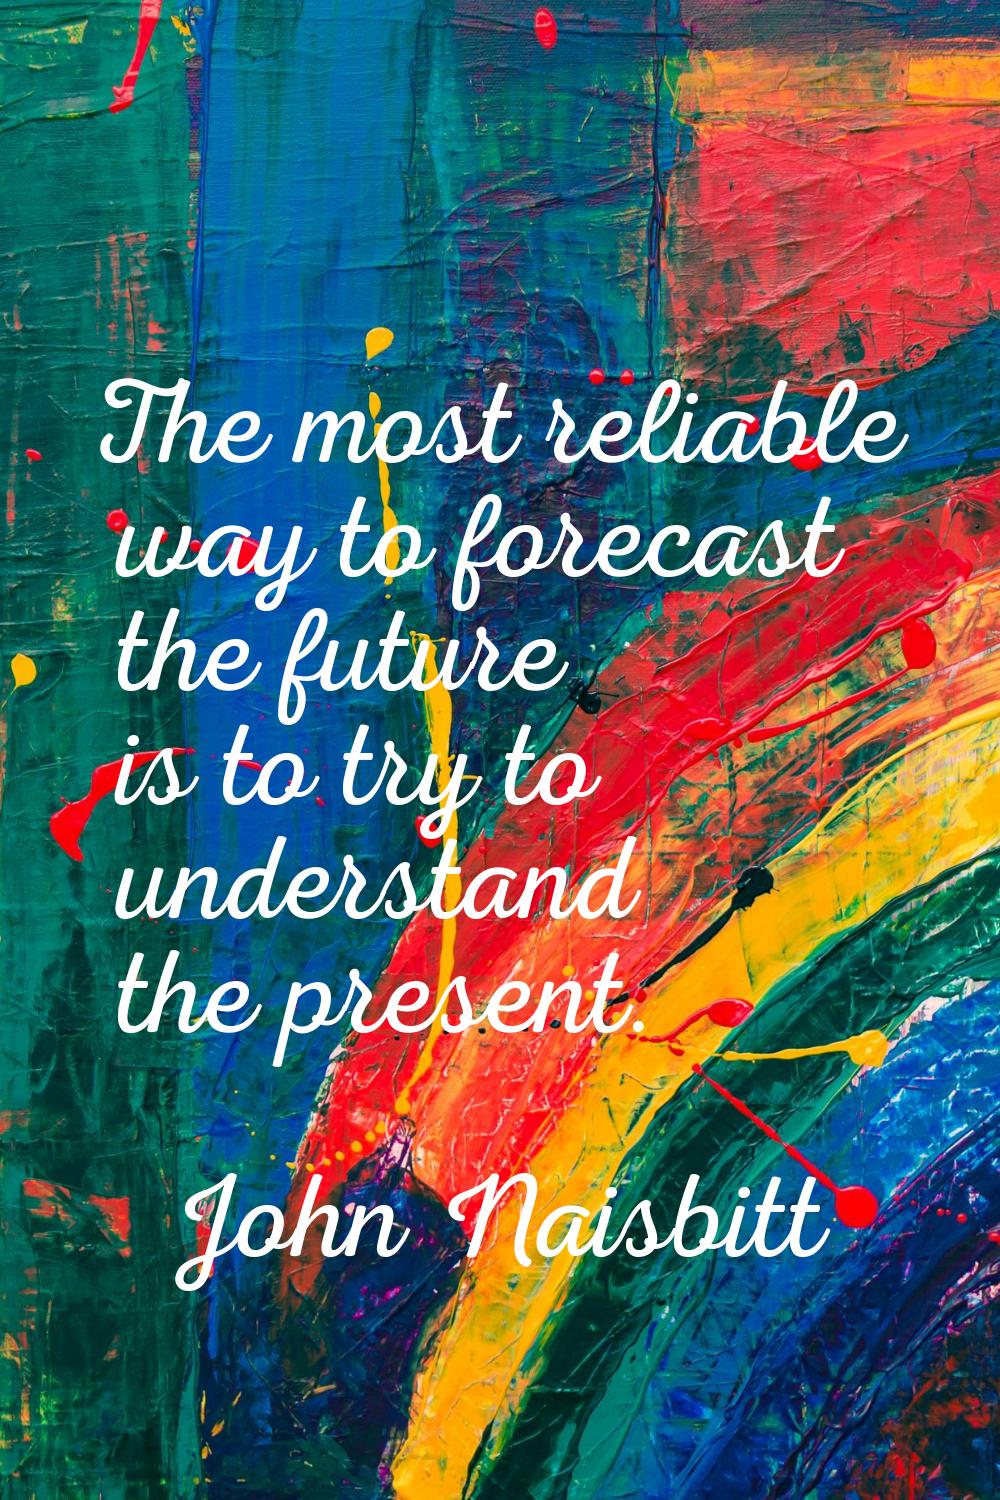 The most reliable way to forecast the future is to try to understand the present.